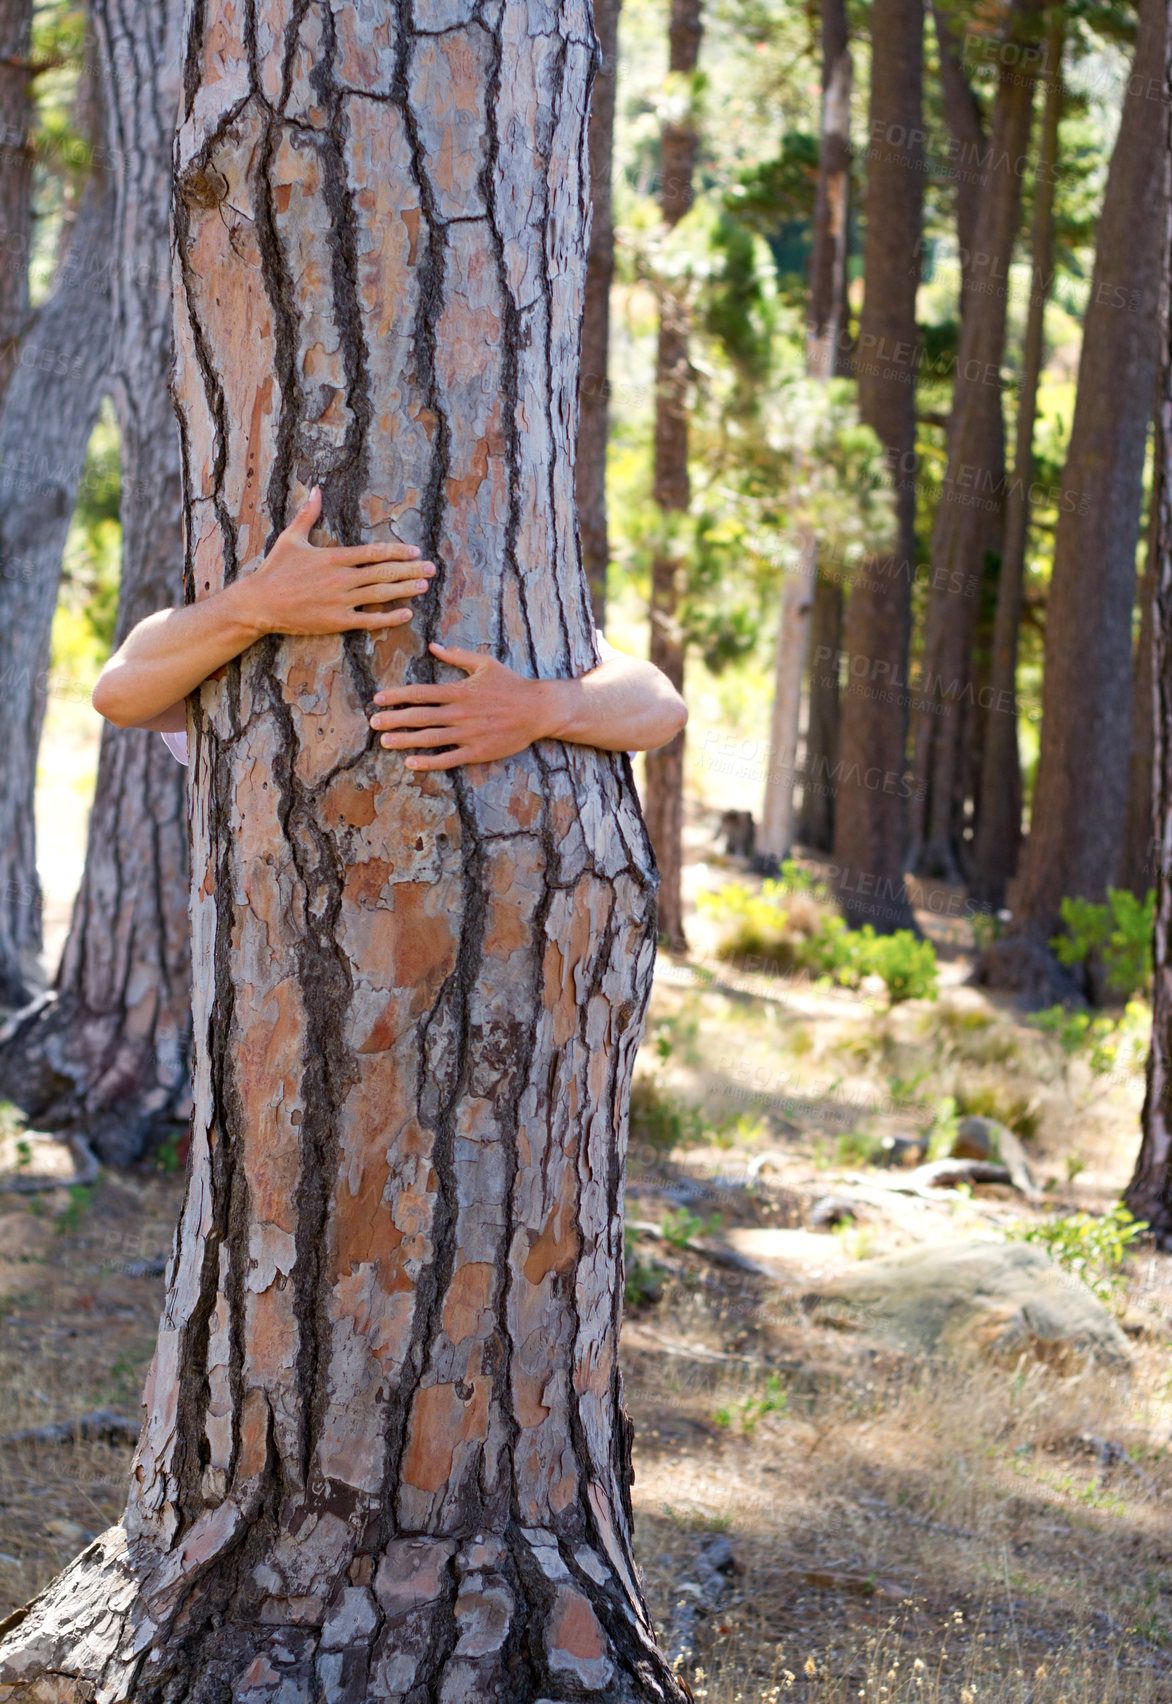 Buy stock photo Closeup, hug and person outdoor, tree and sustainability in the woods, natural and carbon footprint. Zoom, human and nature lover embrace, forest and clean energy with climate change and protection